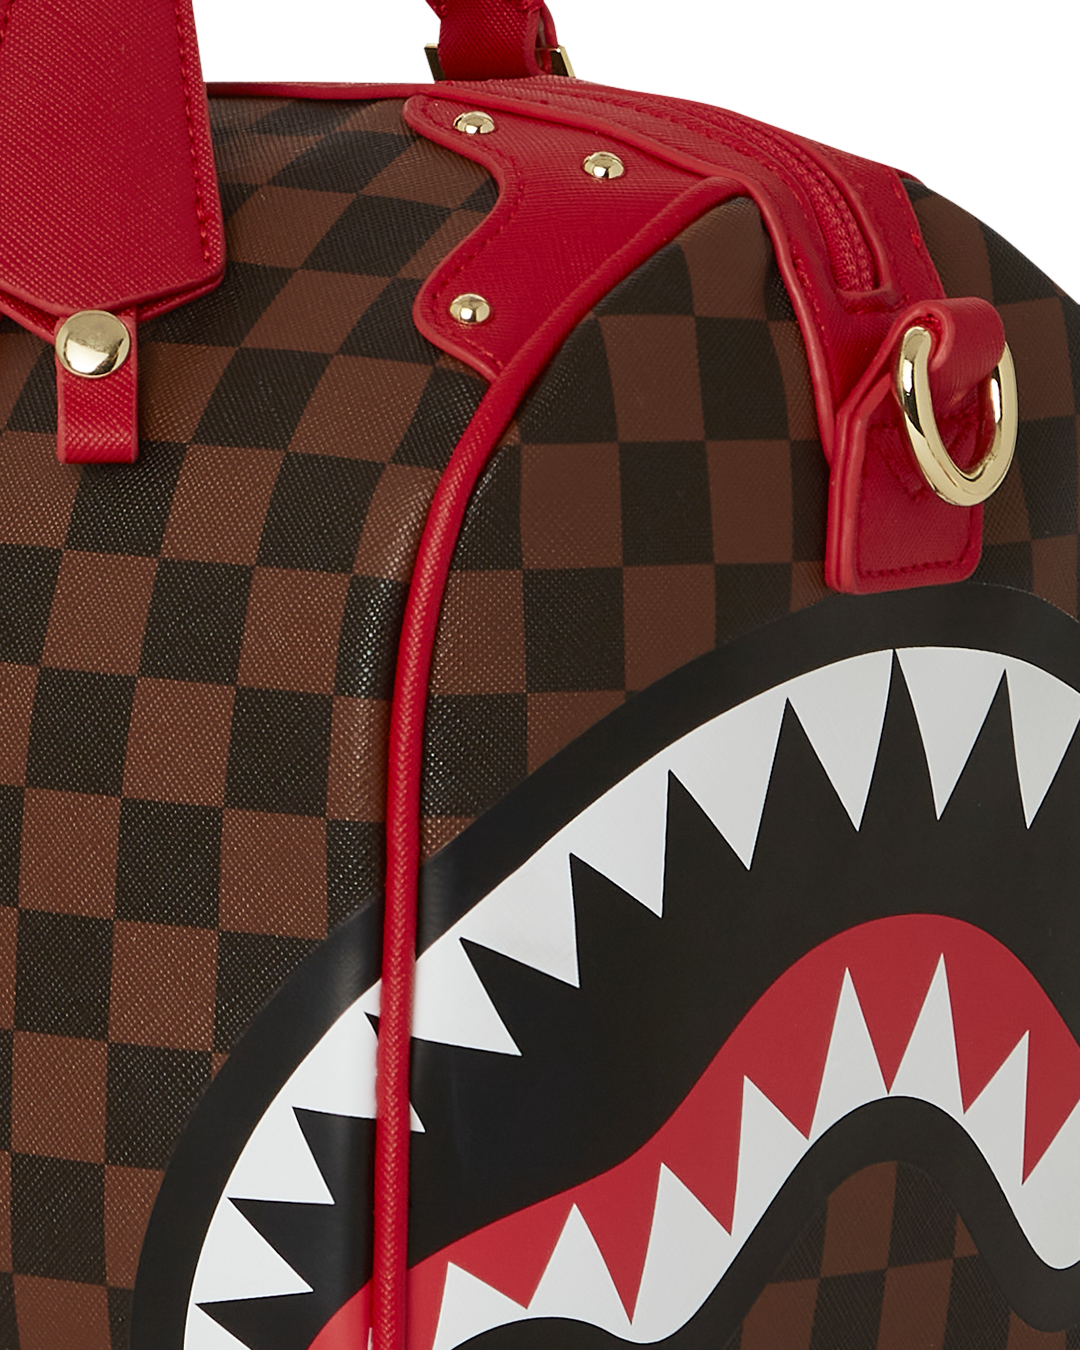 SPRAYGROUND® DUFFLE ALL OR NOTHING SHARKS IN PARIS MINI DUFFLE